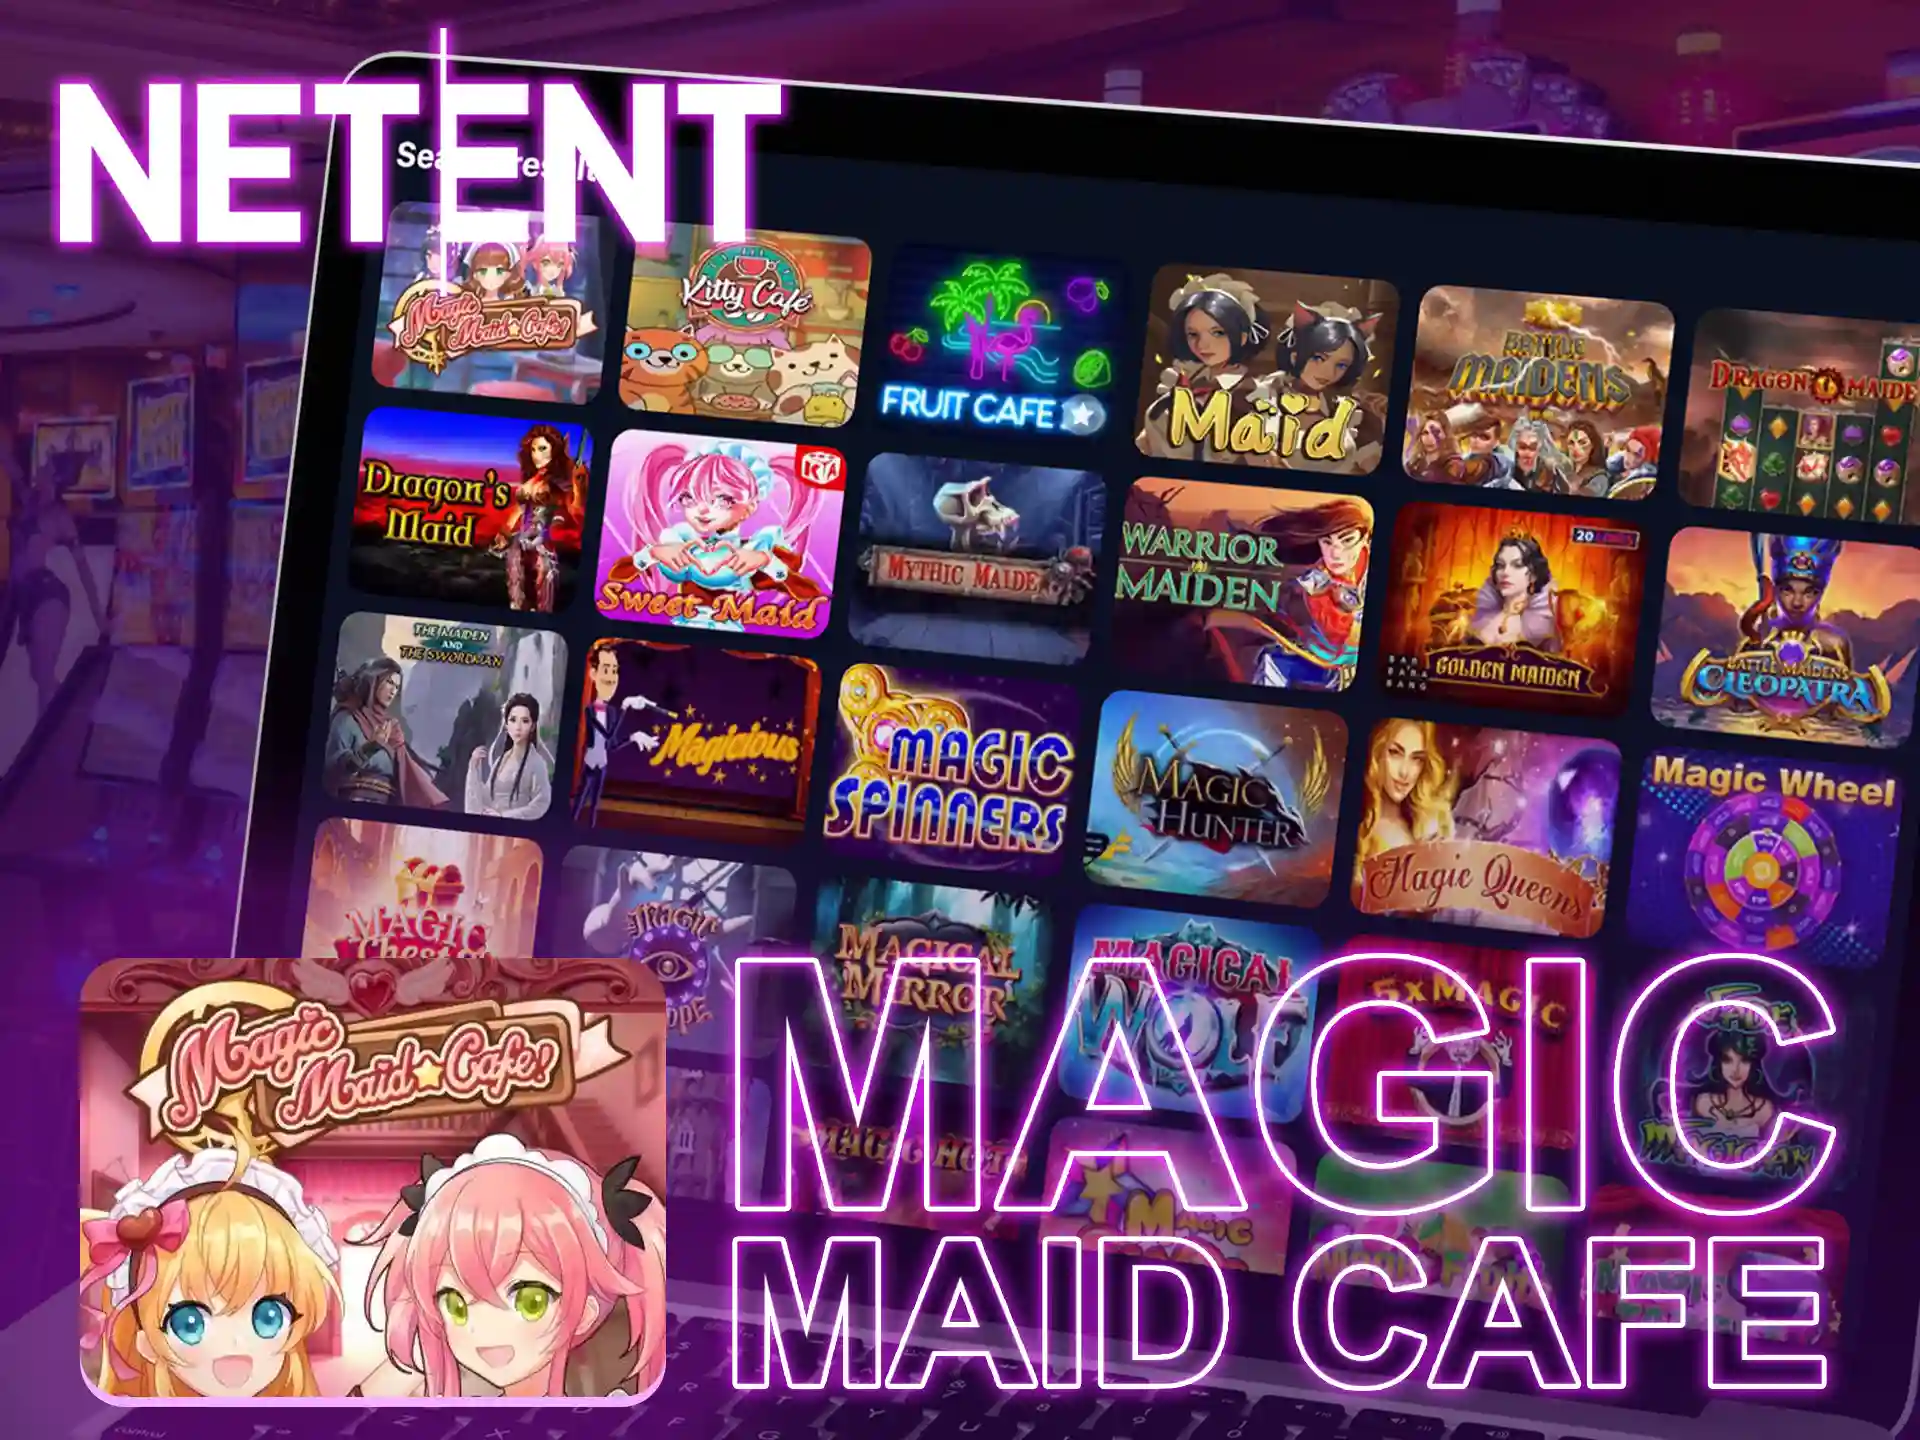 Magic Maid Cafe is differentiated from other slots by its anime drawings and cartoon images.